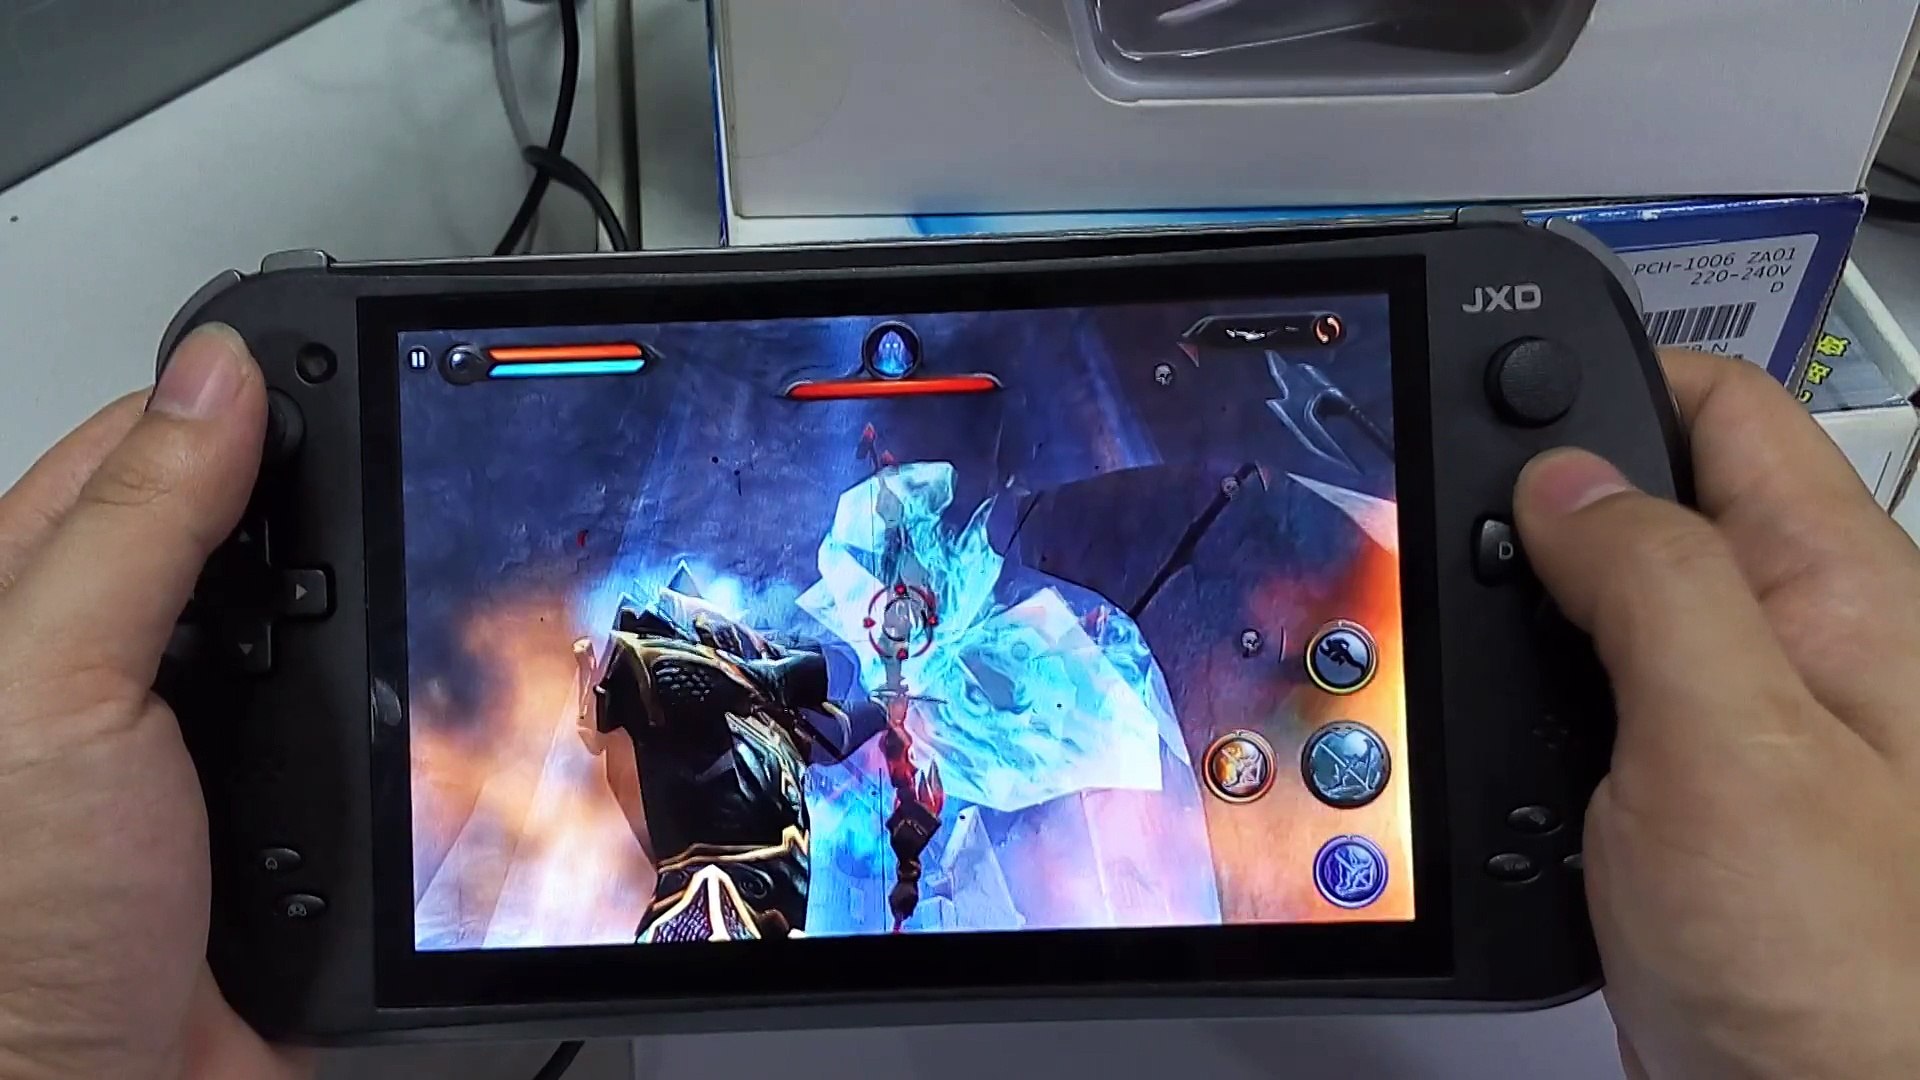 ⁣【06】 Wild Blood RPG Video game on JXD S7800B android game console